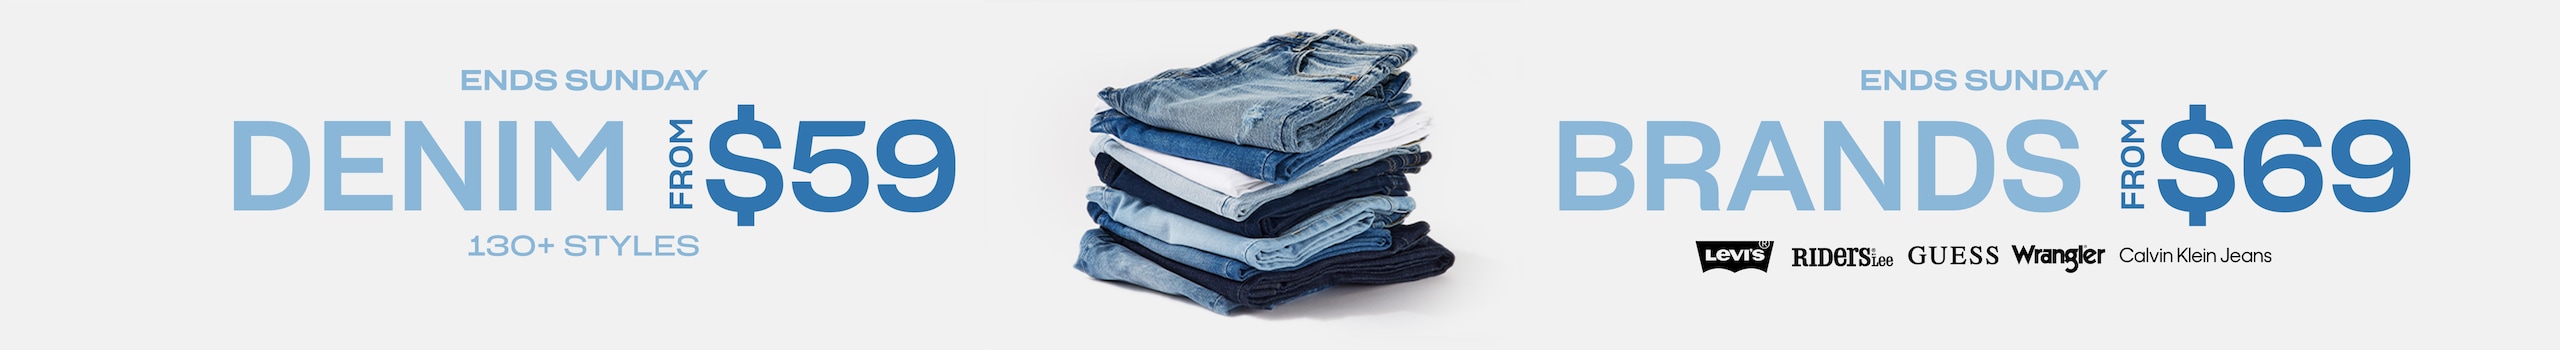 Denim From $59. Brands From $69.